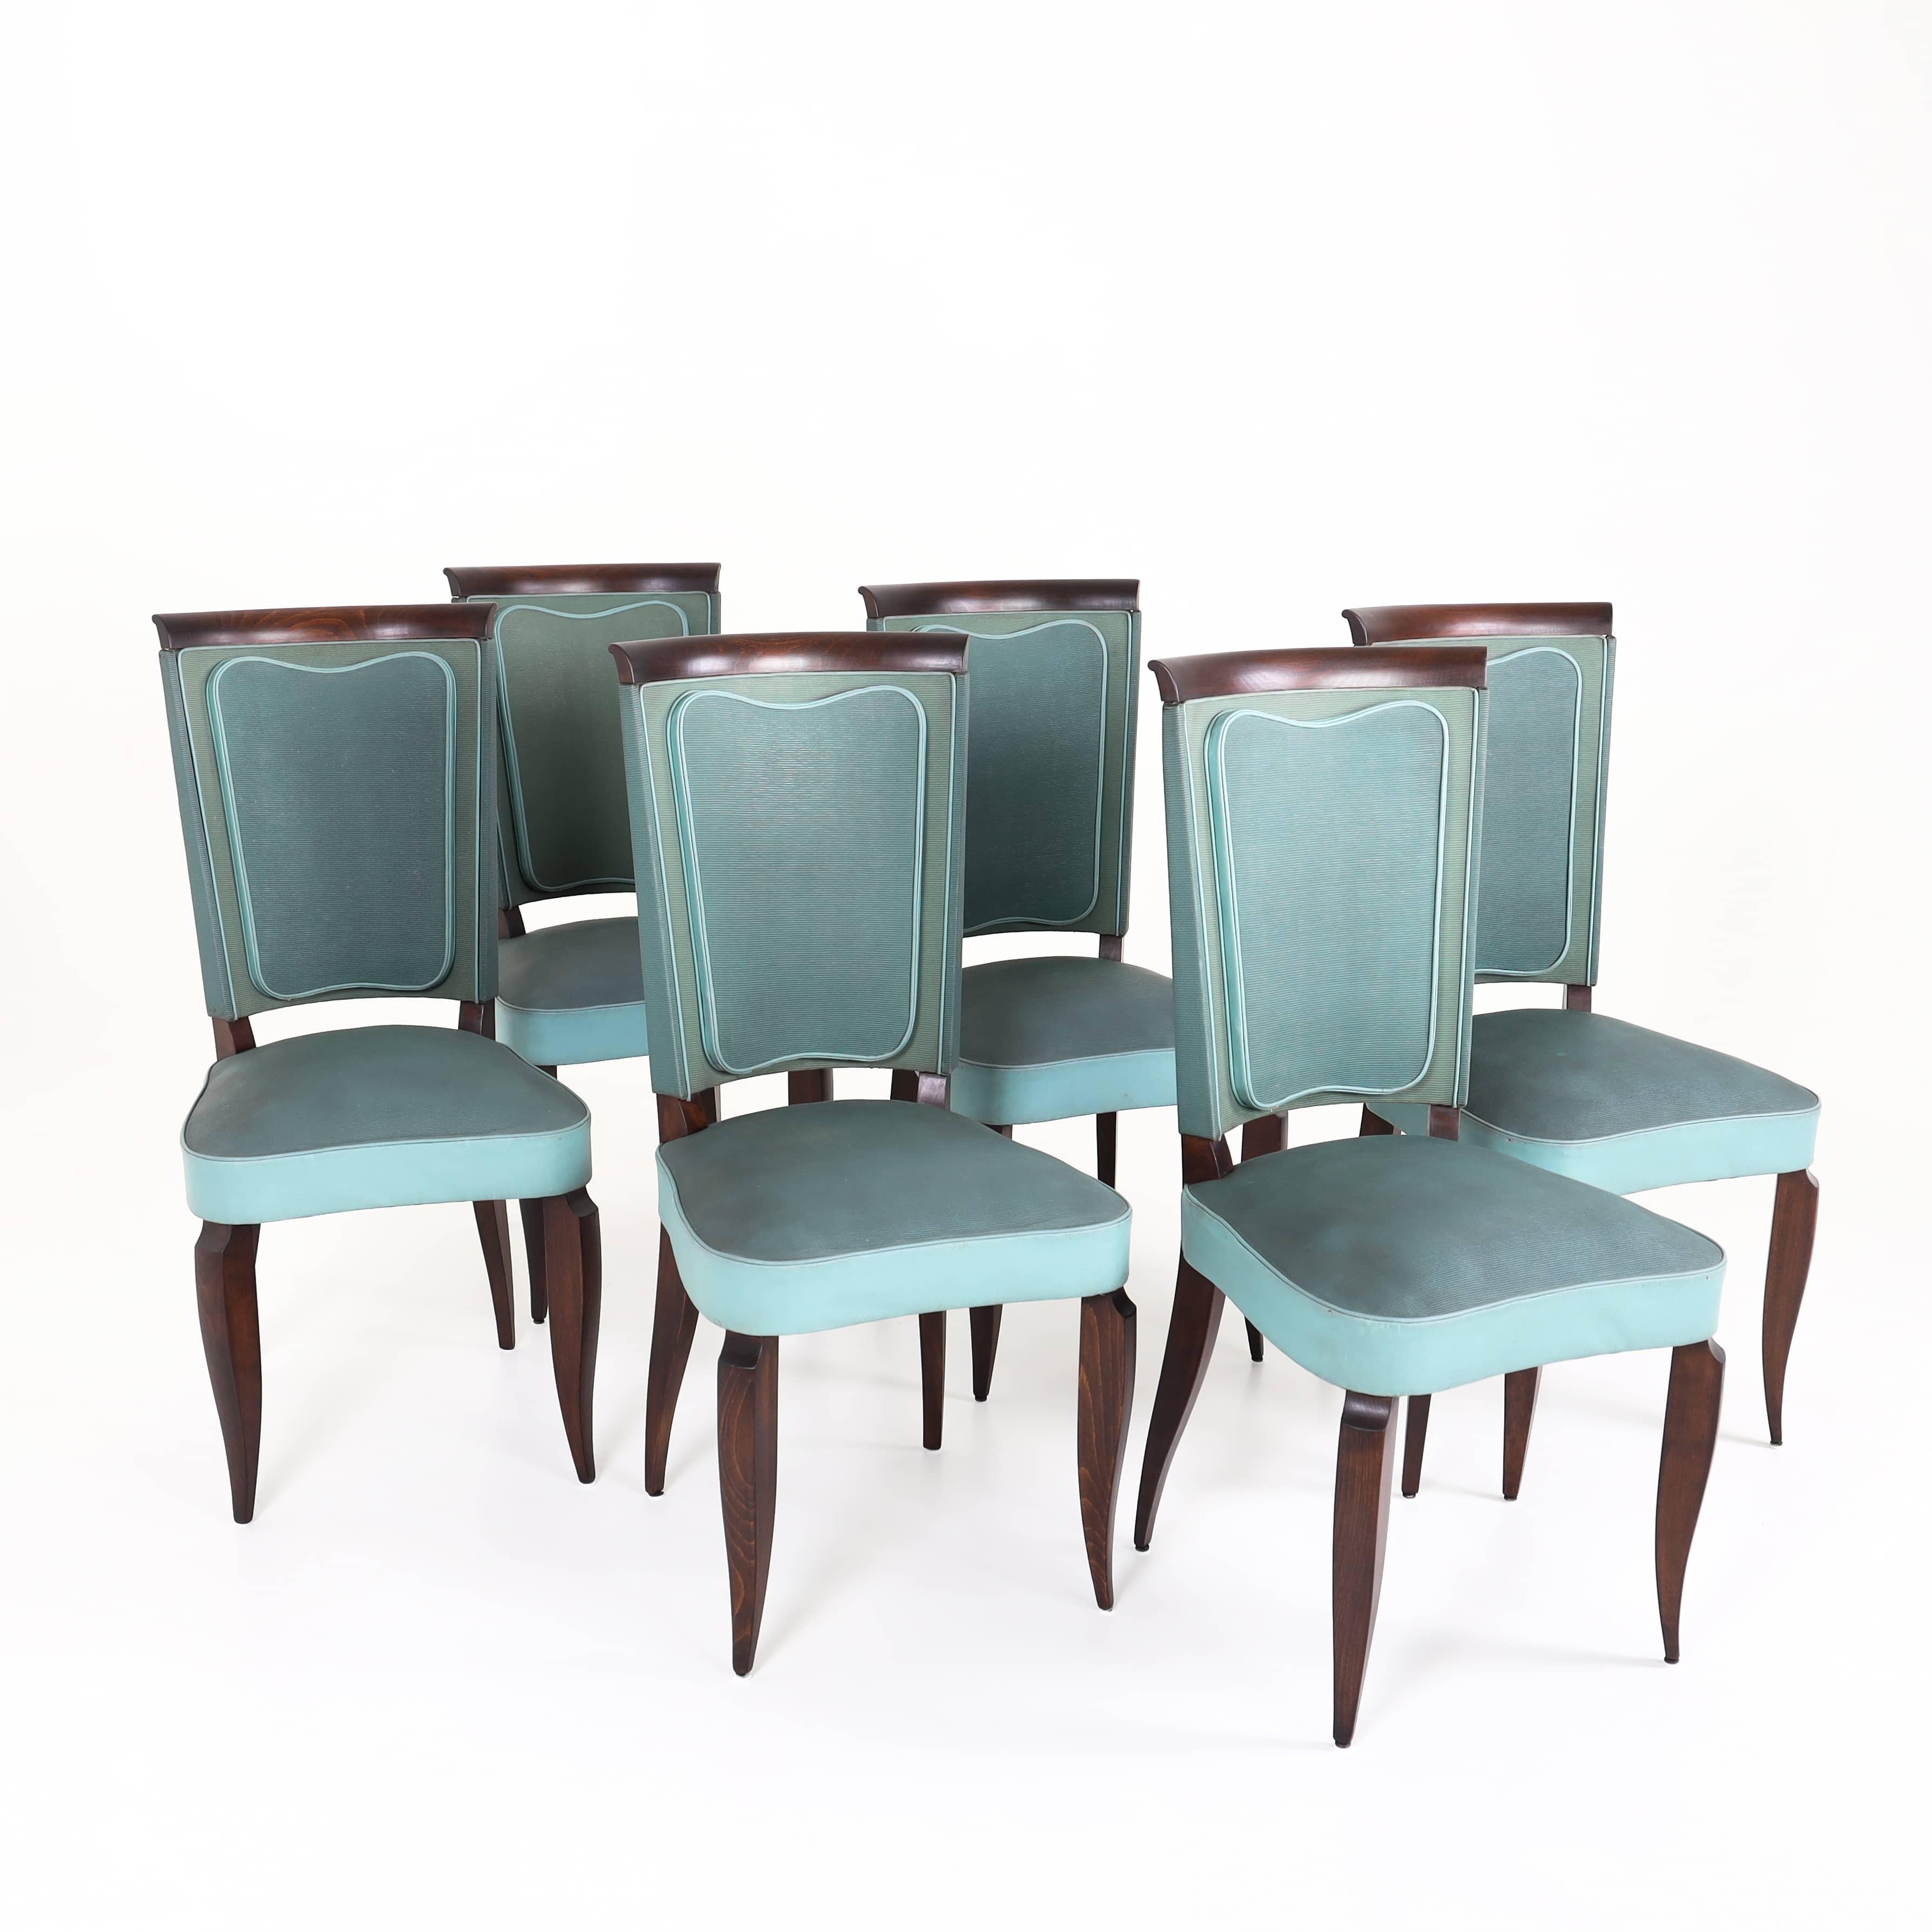 Set of six Art Deco dining chairs on elegant, curved legs with elaborately upholstered seats and backs. The wooden elements have been refurbished, the upholstery is in used, good condition.